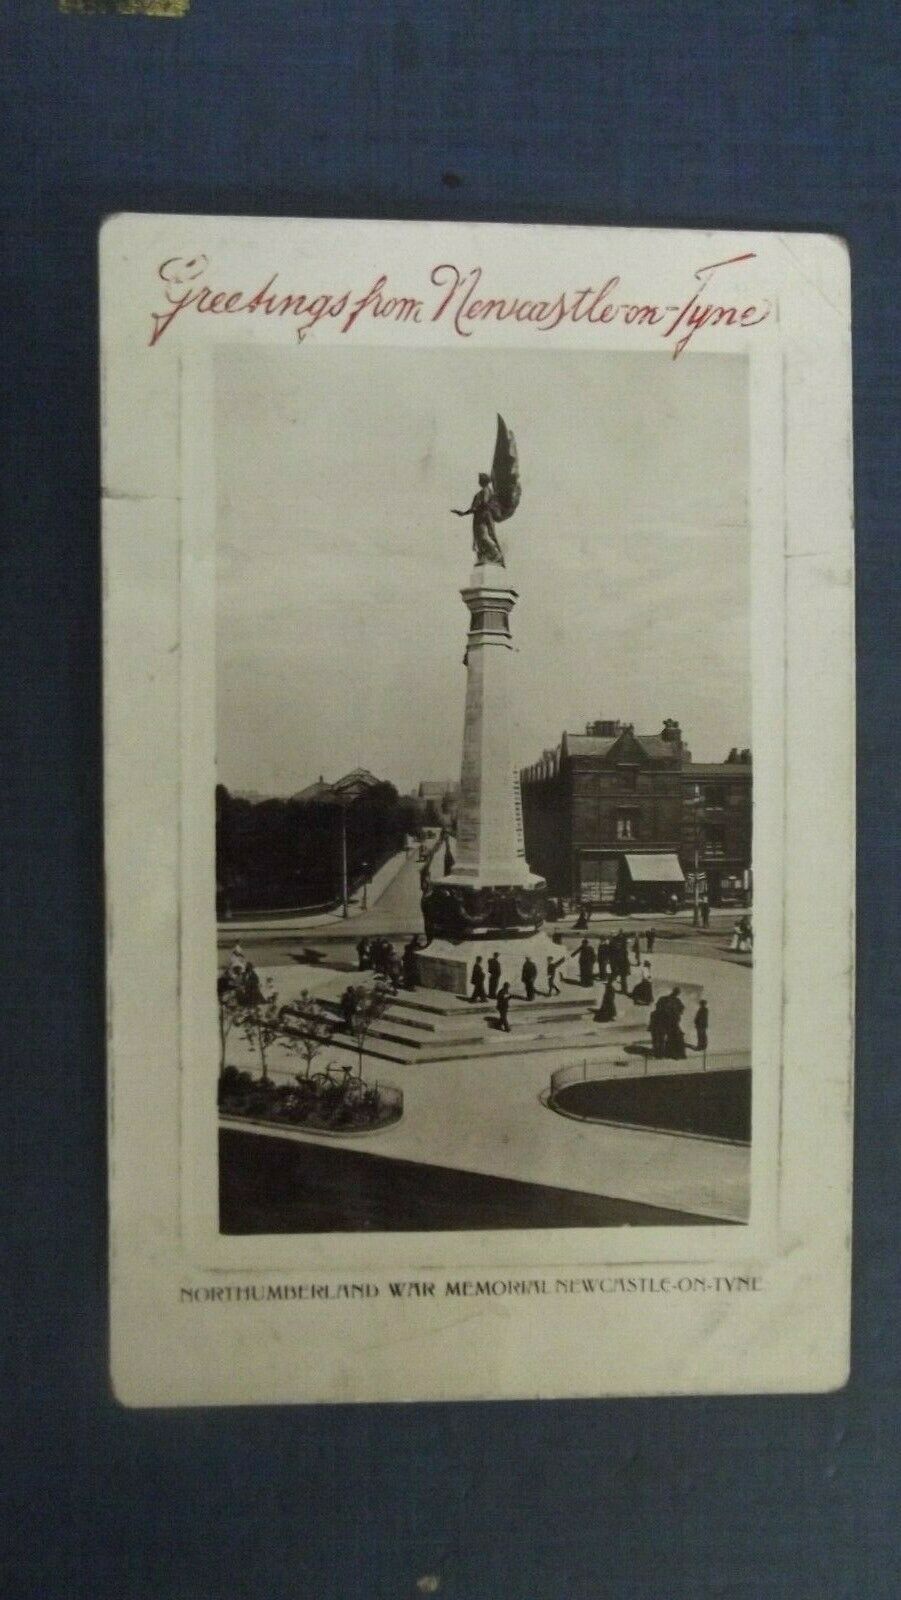 House Clearance - Northumberland War Memorial Newcastle upon Tyne Anon P/card c 1910 Unposted